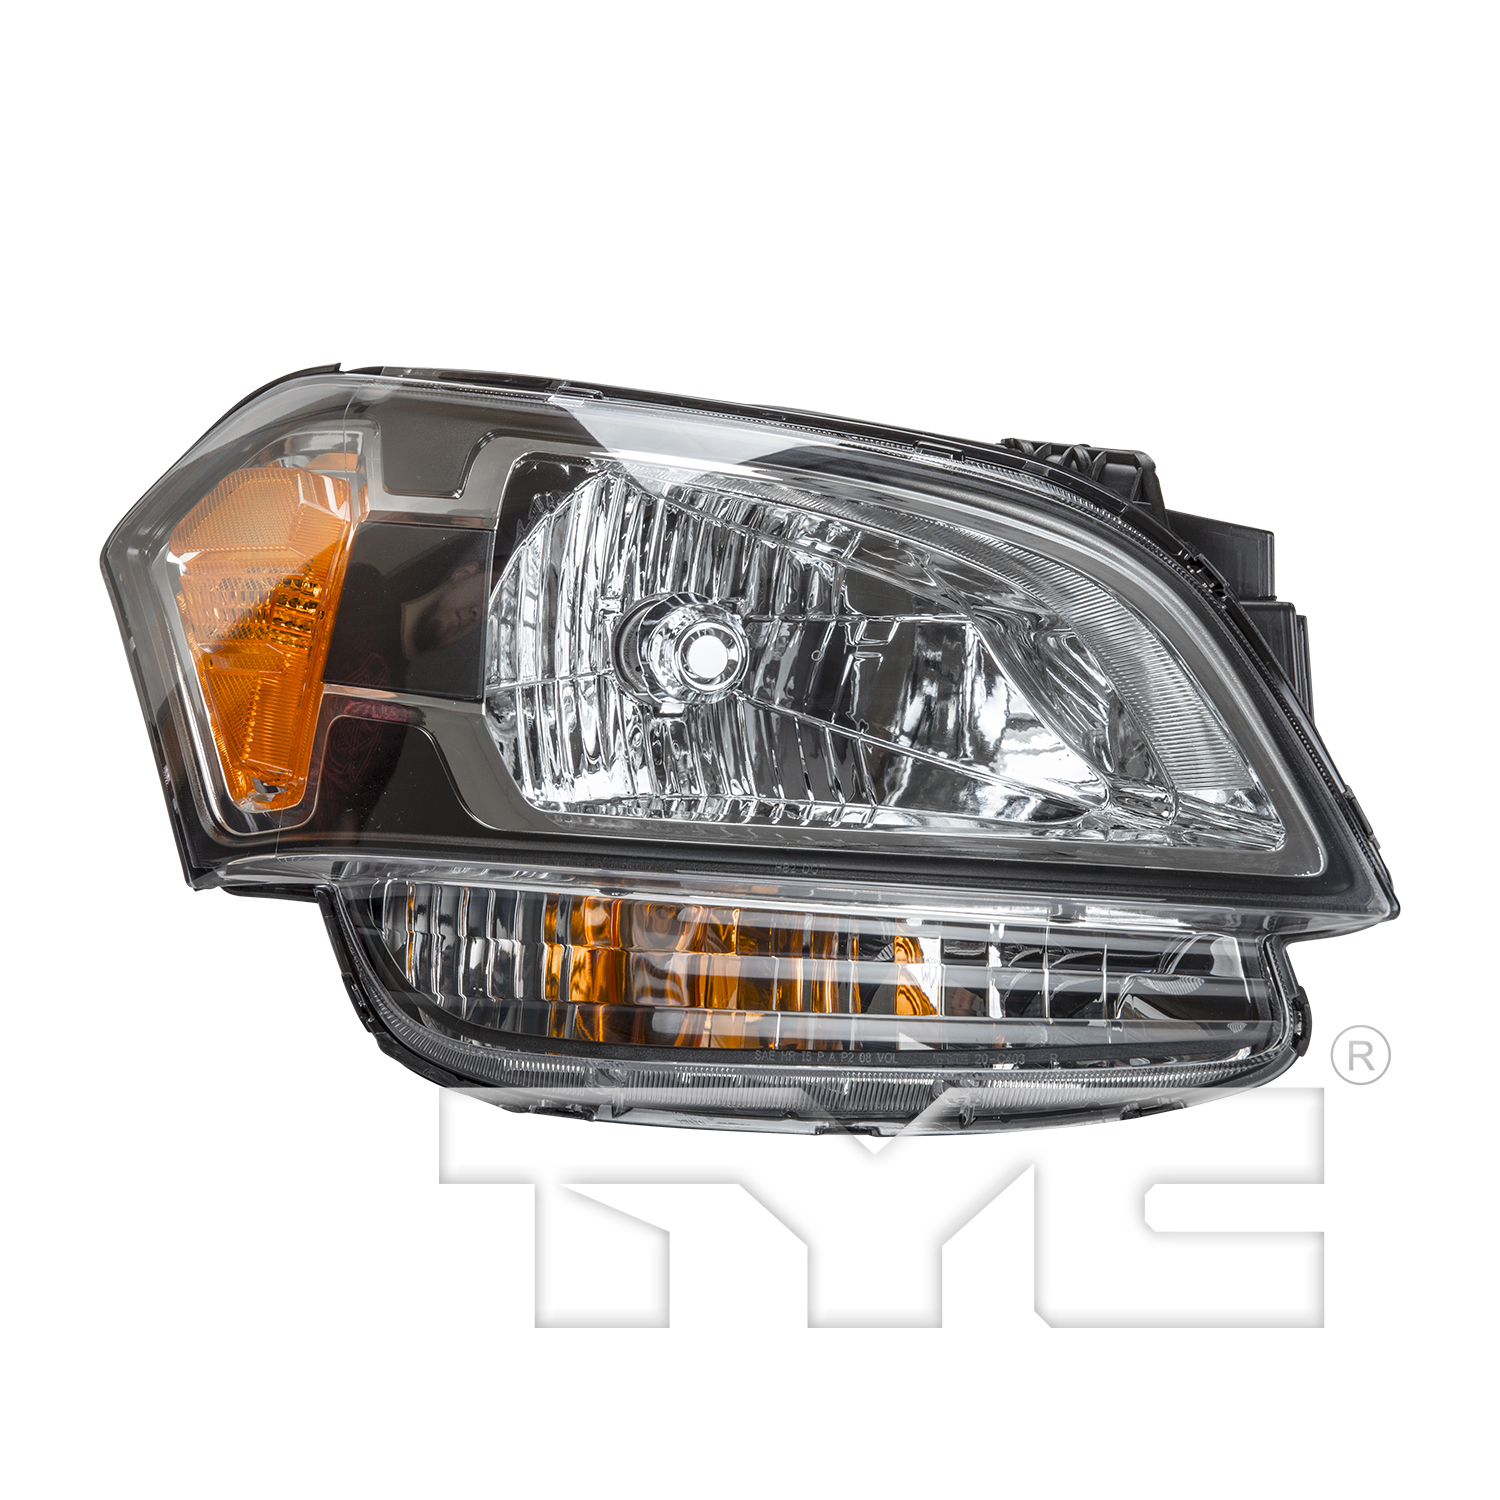 Aftermarket HEADLIGHTS for KIA - SOUL, SOUL,10-11,RT Headlamp assy composite